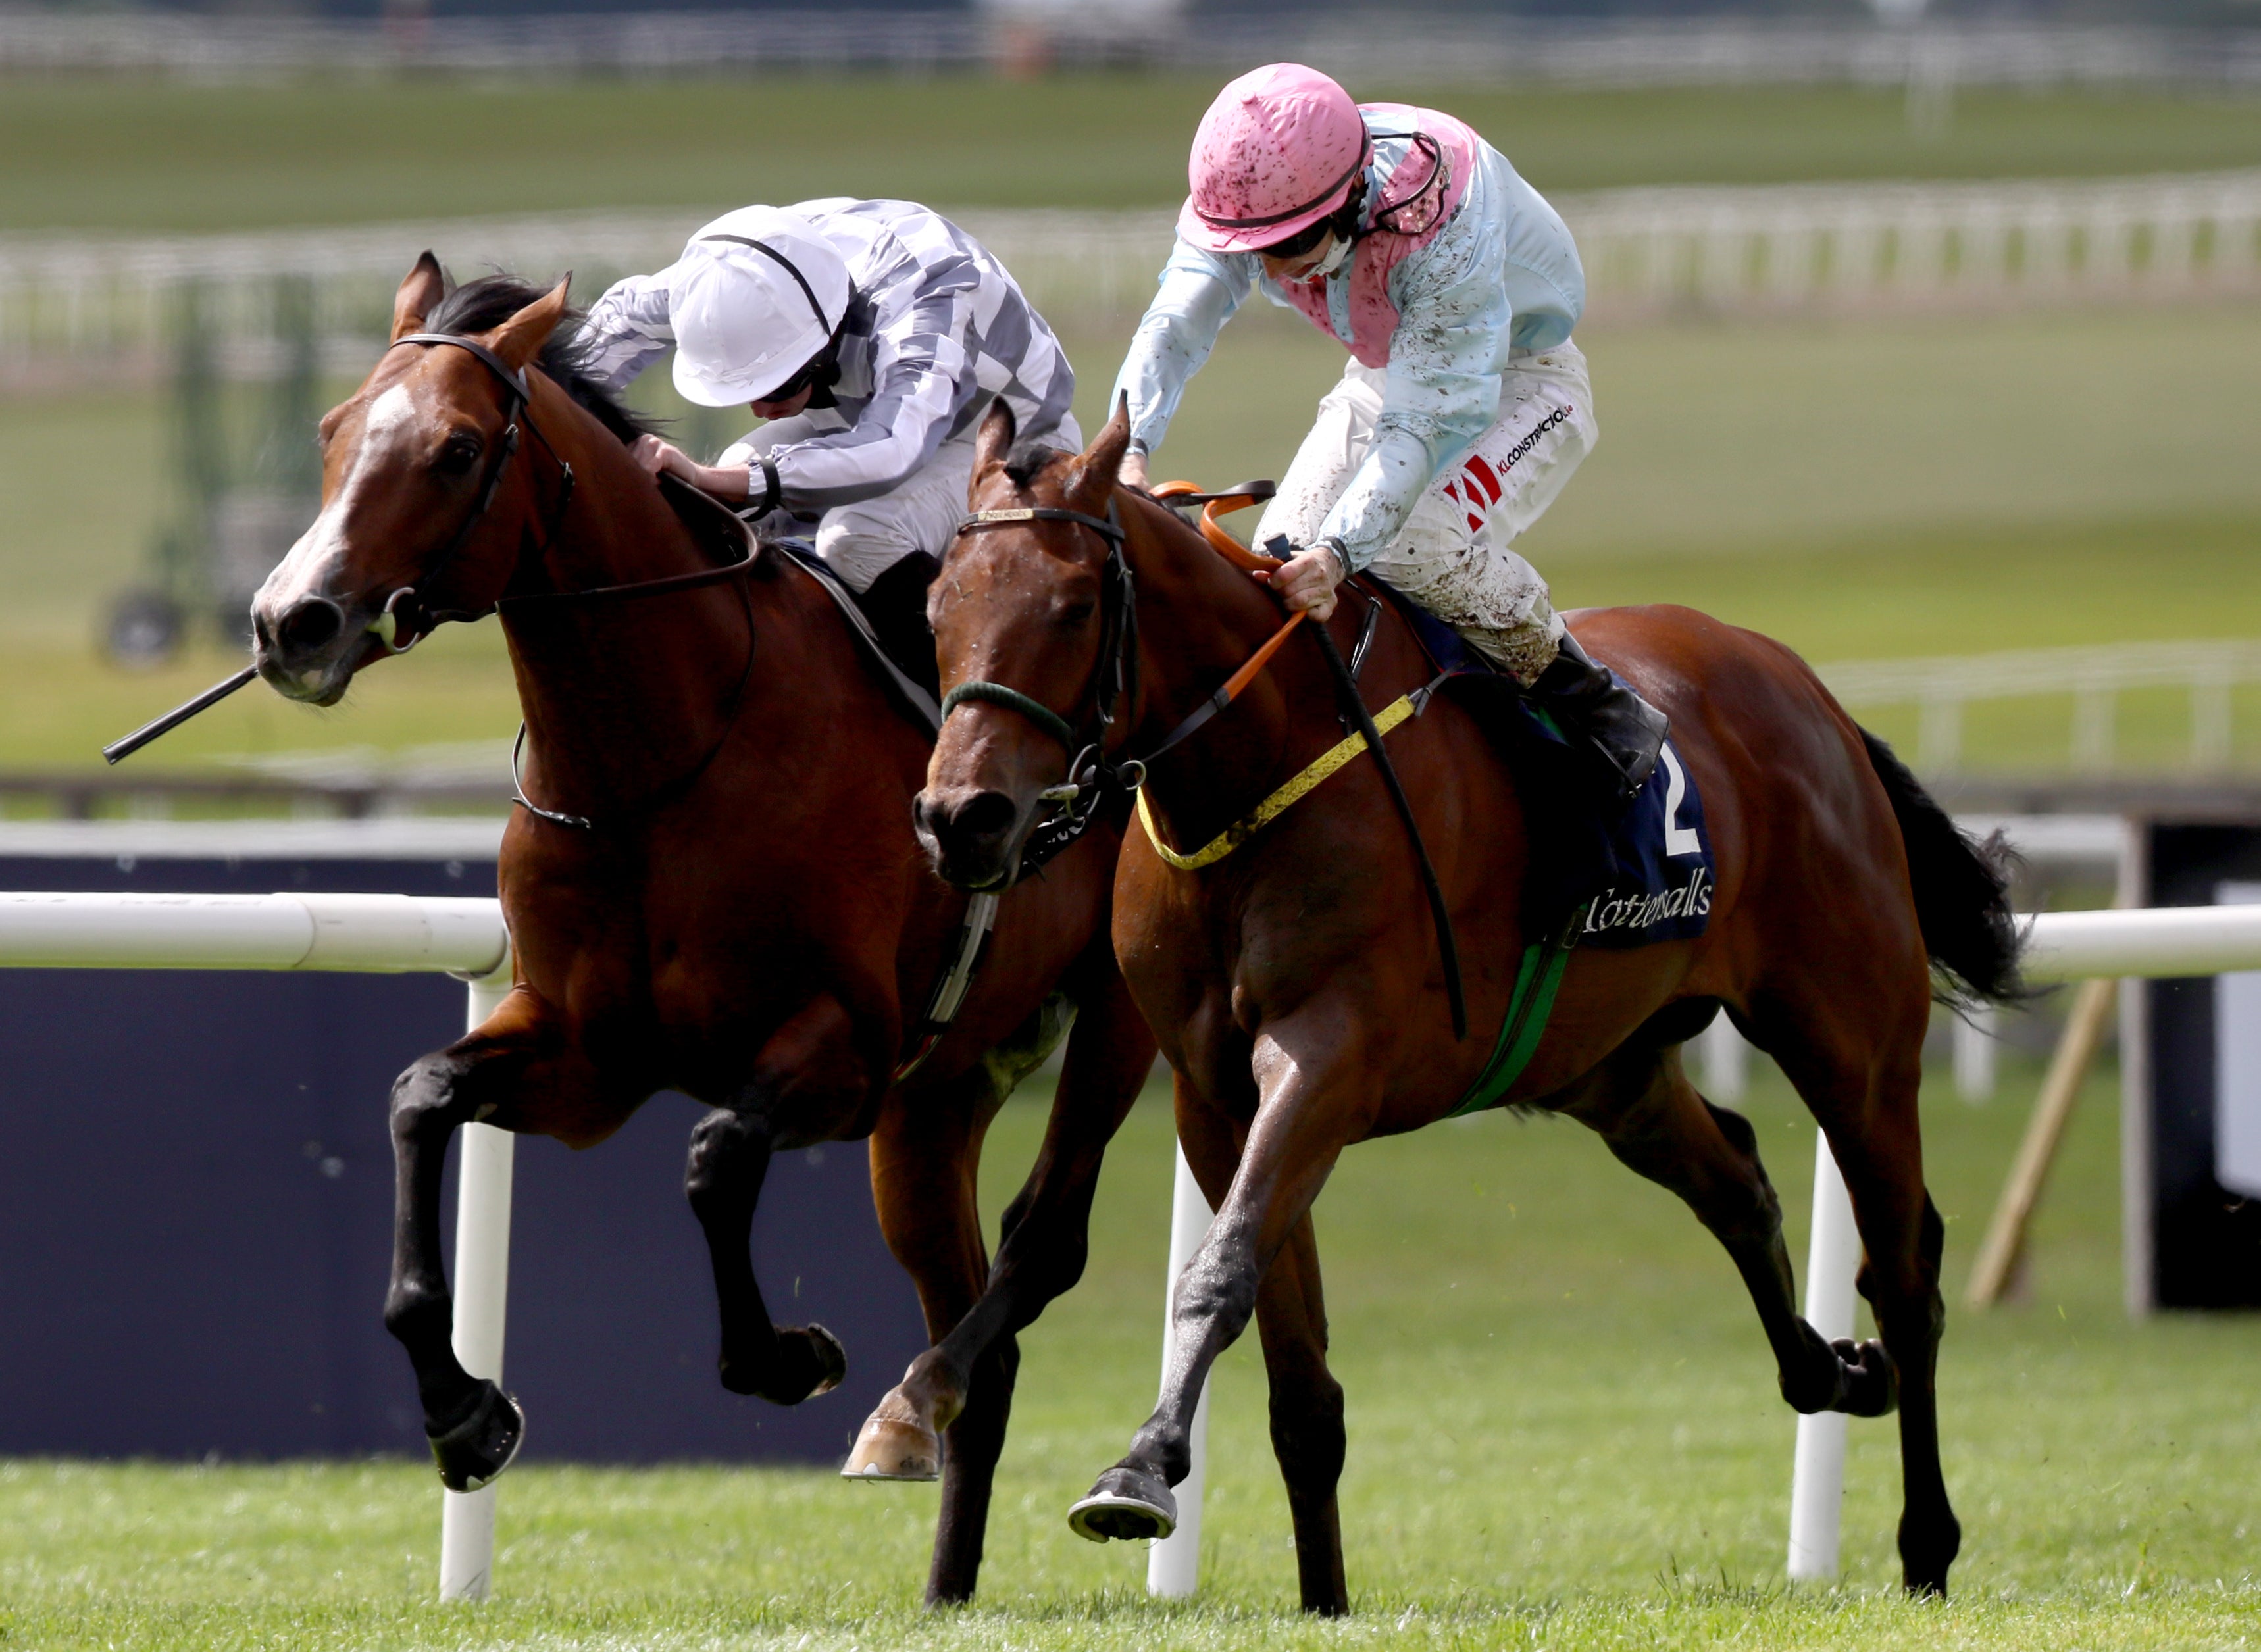 Helvic Dream (right) on his way to winning the Tattersalls Gold Cup